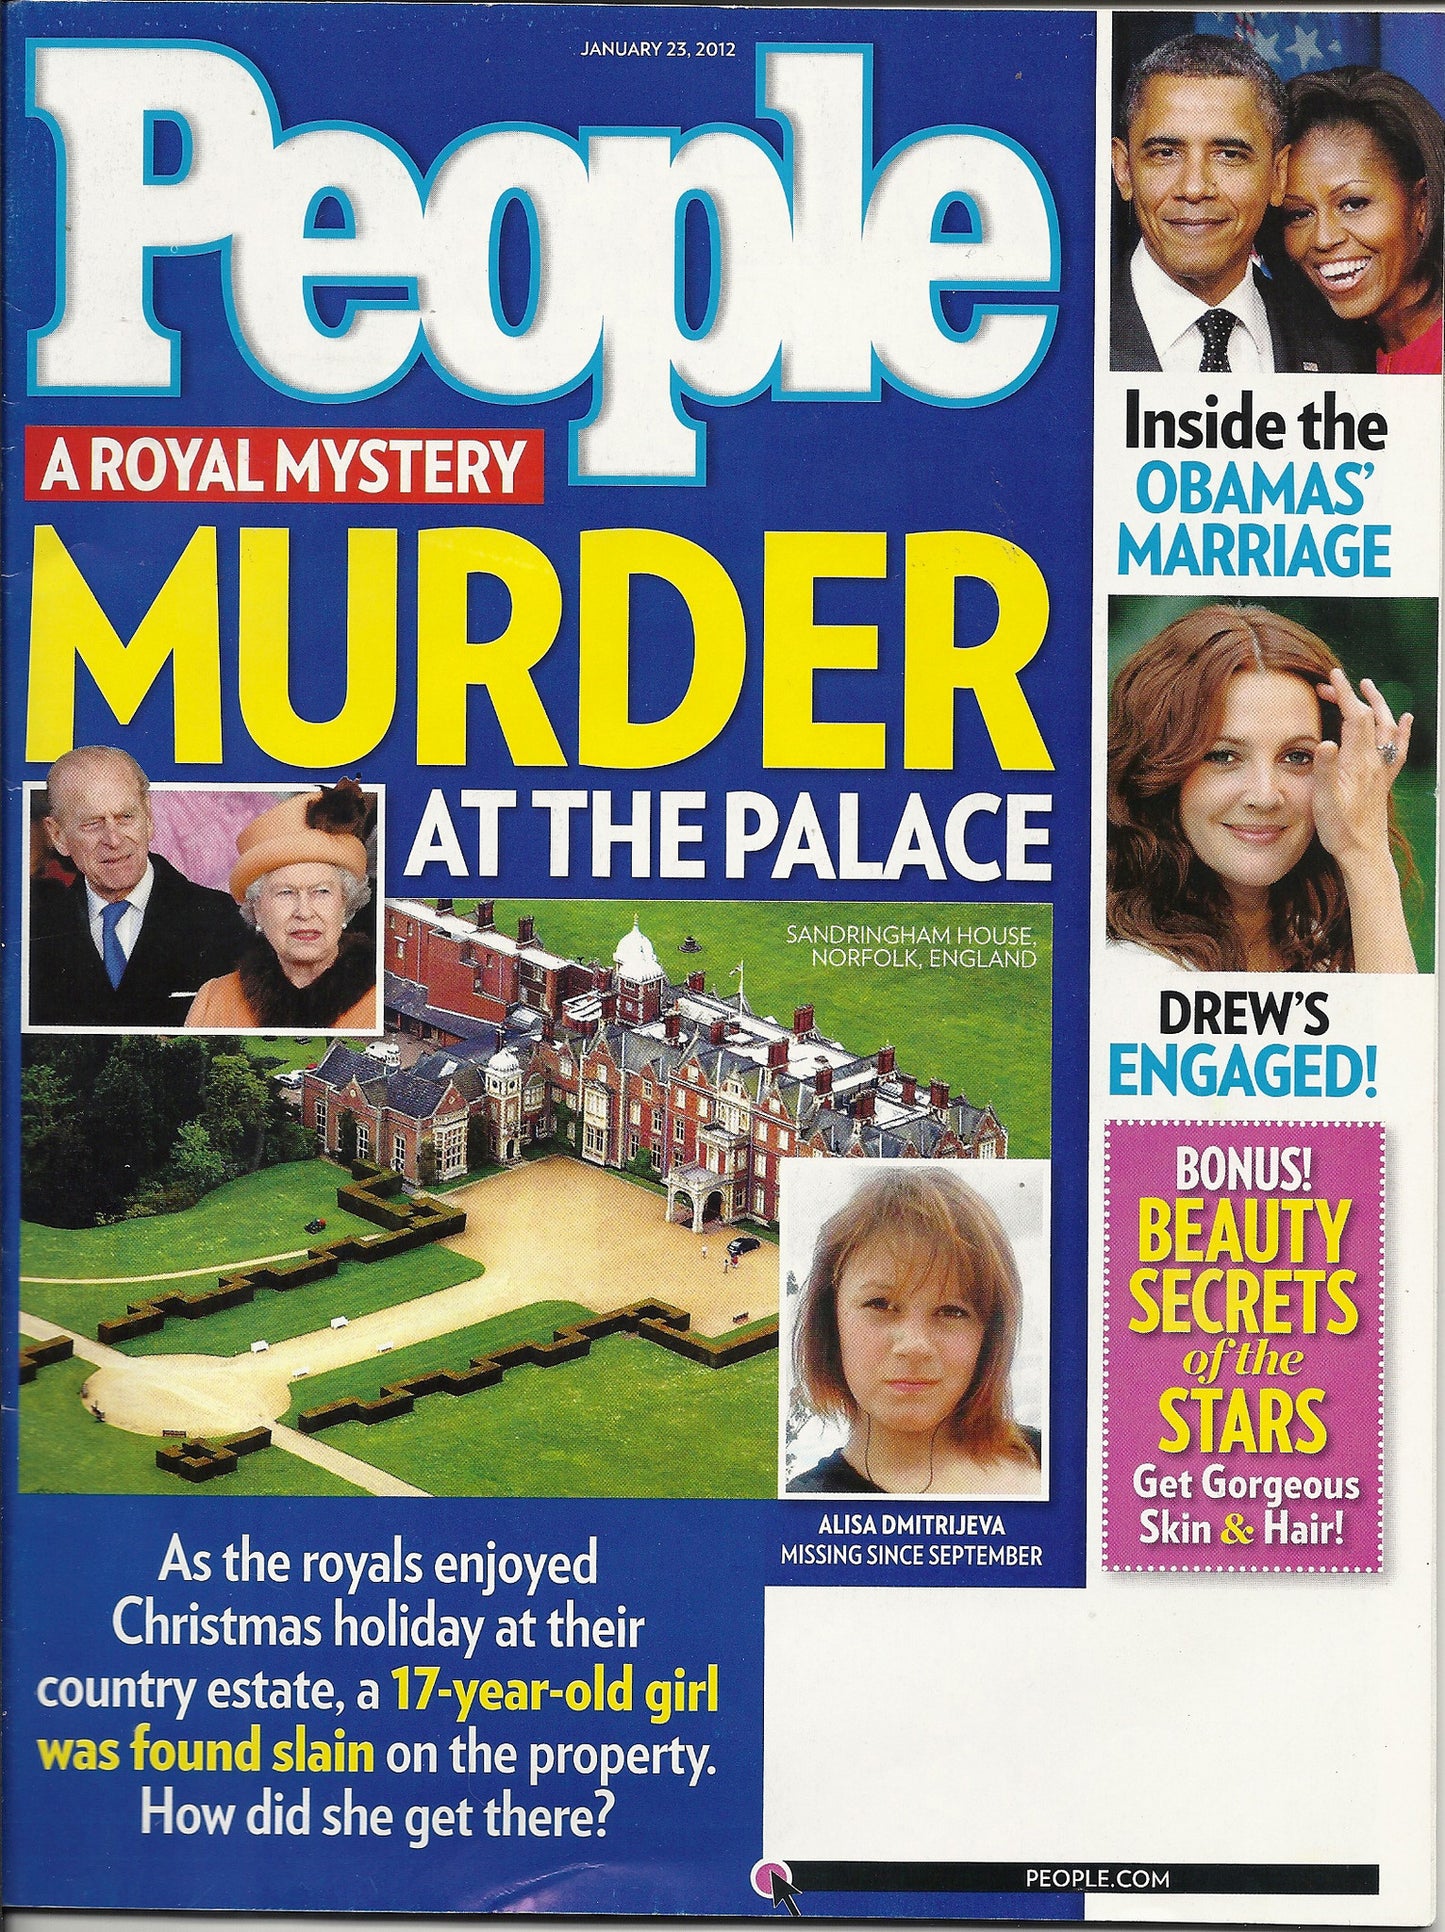 01 23 2012 People A Royal Mystery Murder at the Palace